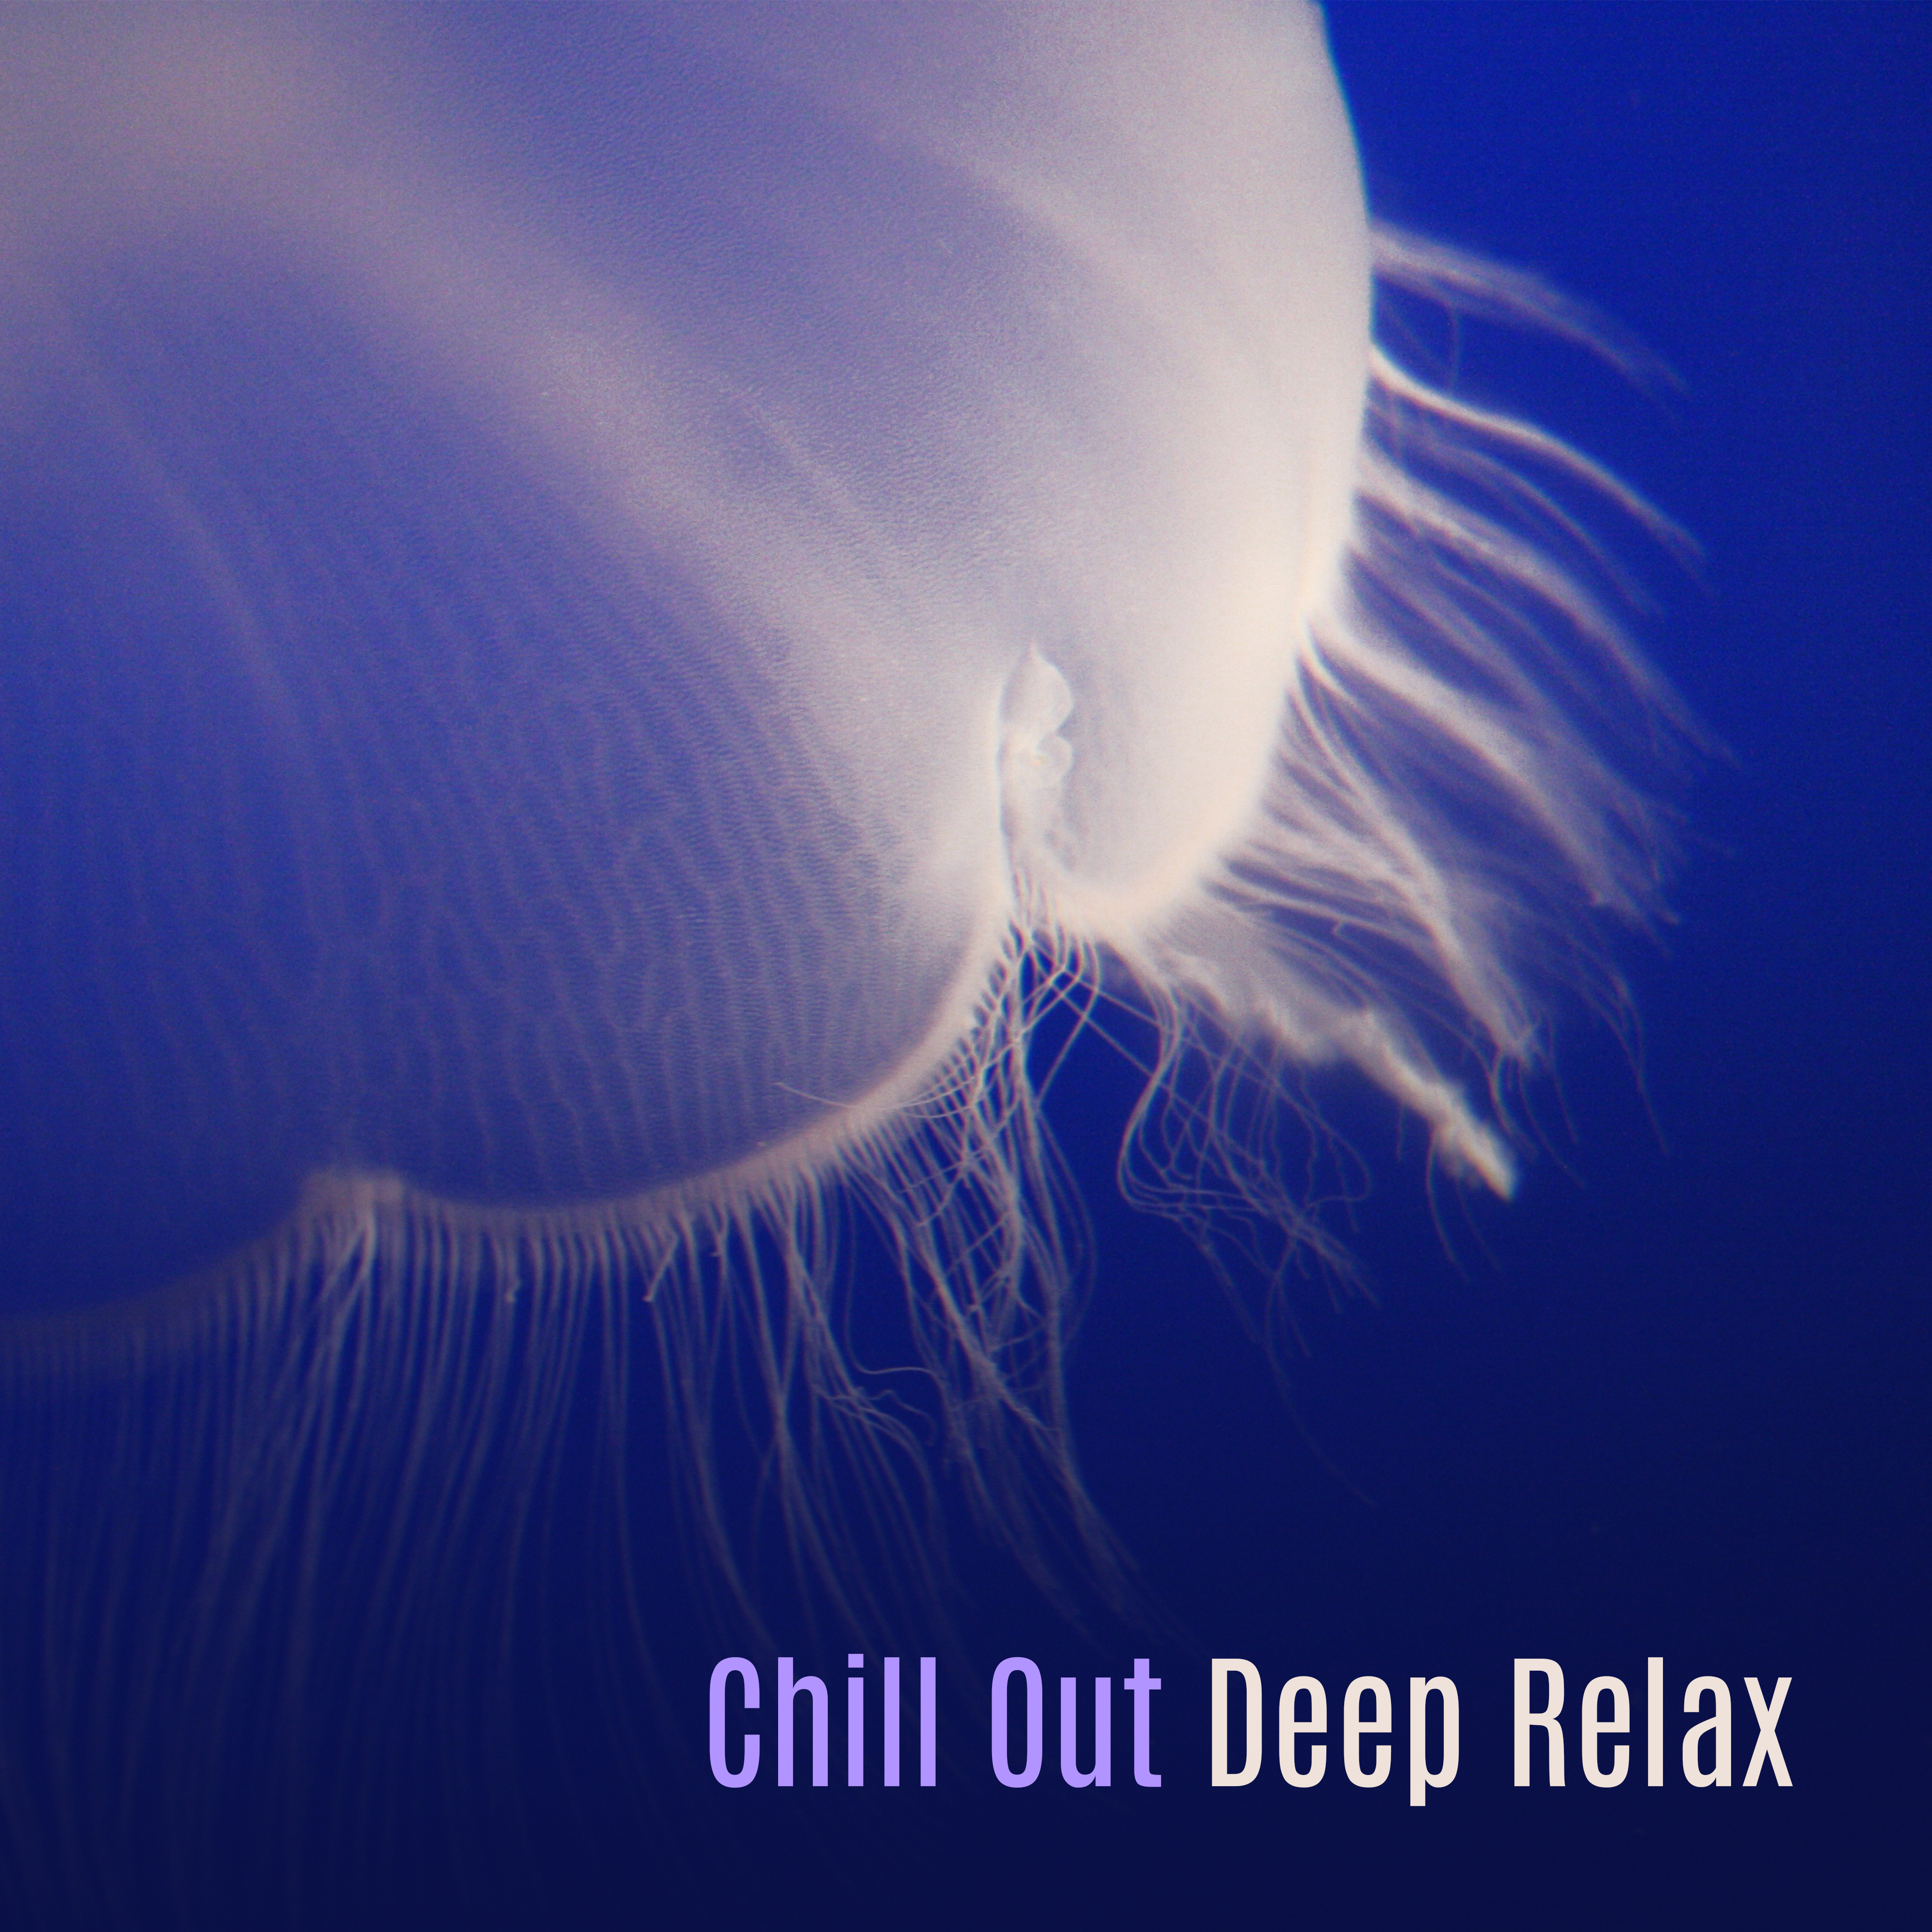 Chill Out Deep Relax – Calm Chill Out Music, Rest a Bit, Peaceful Waves, Summer Chill Vibes